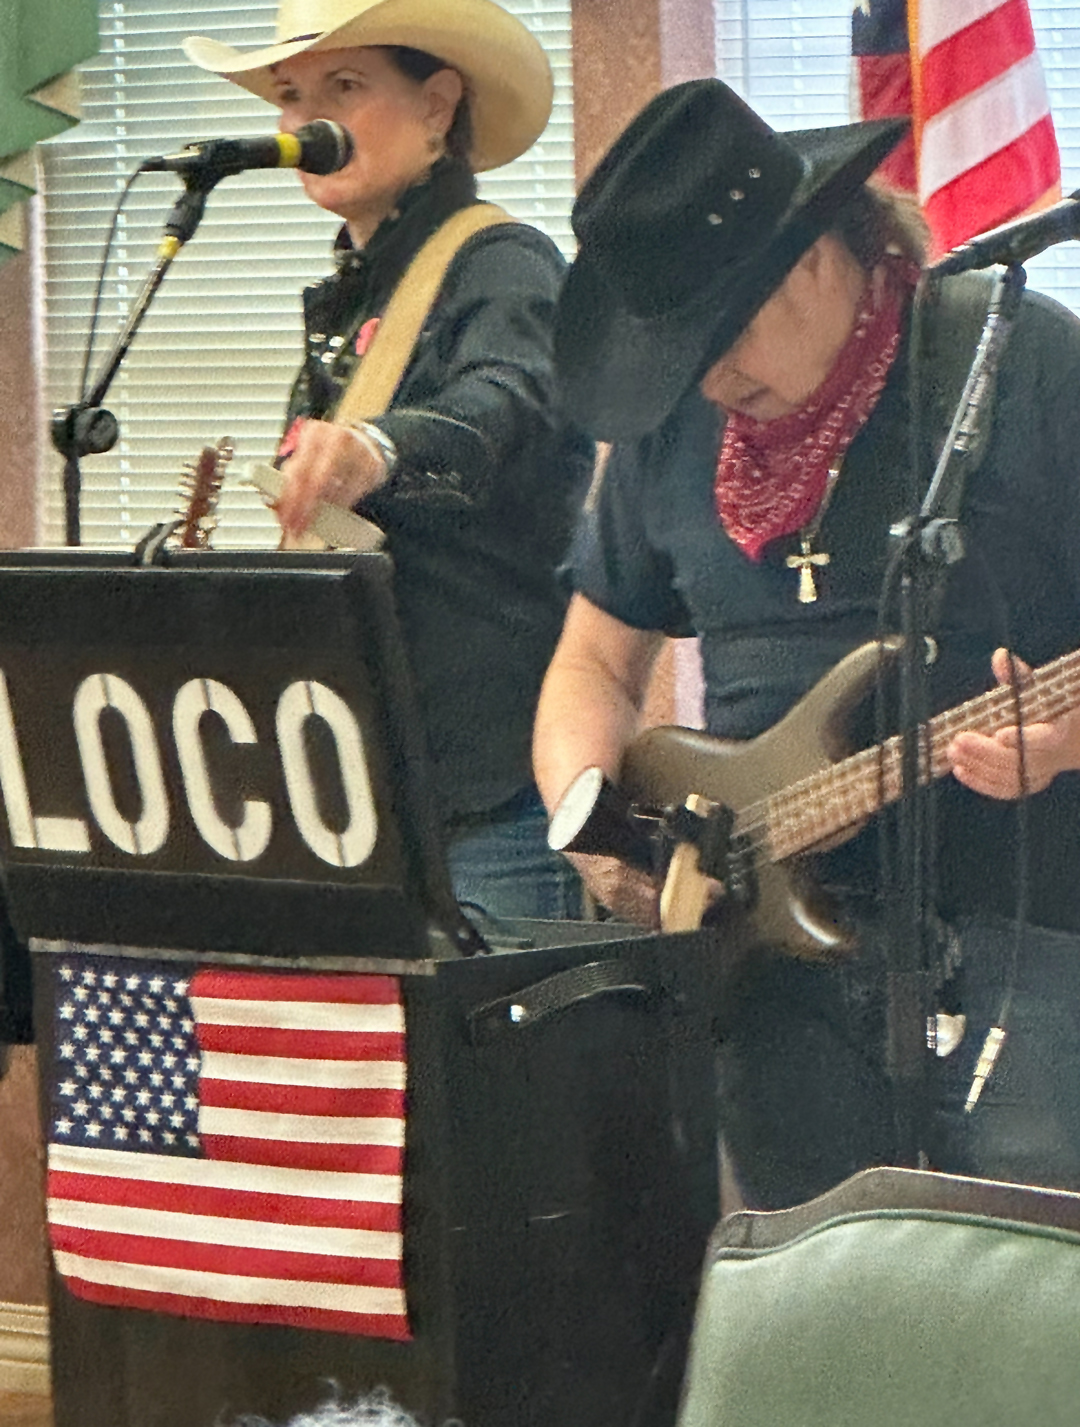 The Band Loco played for the residents